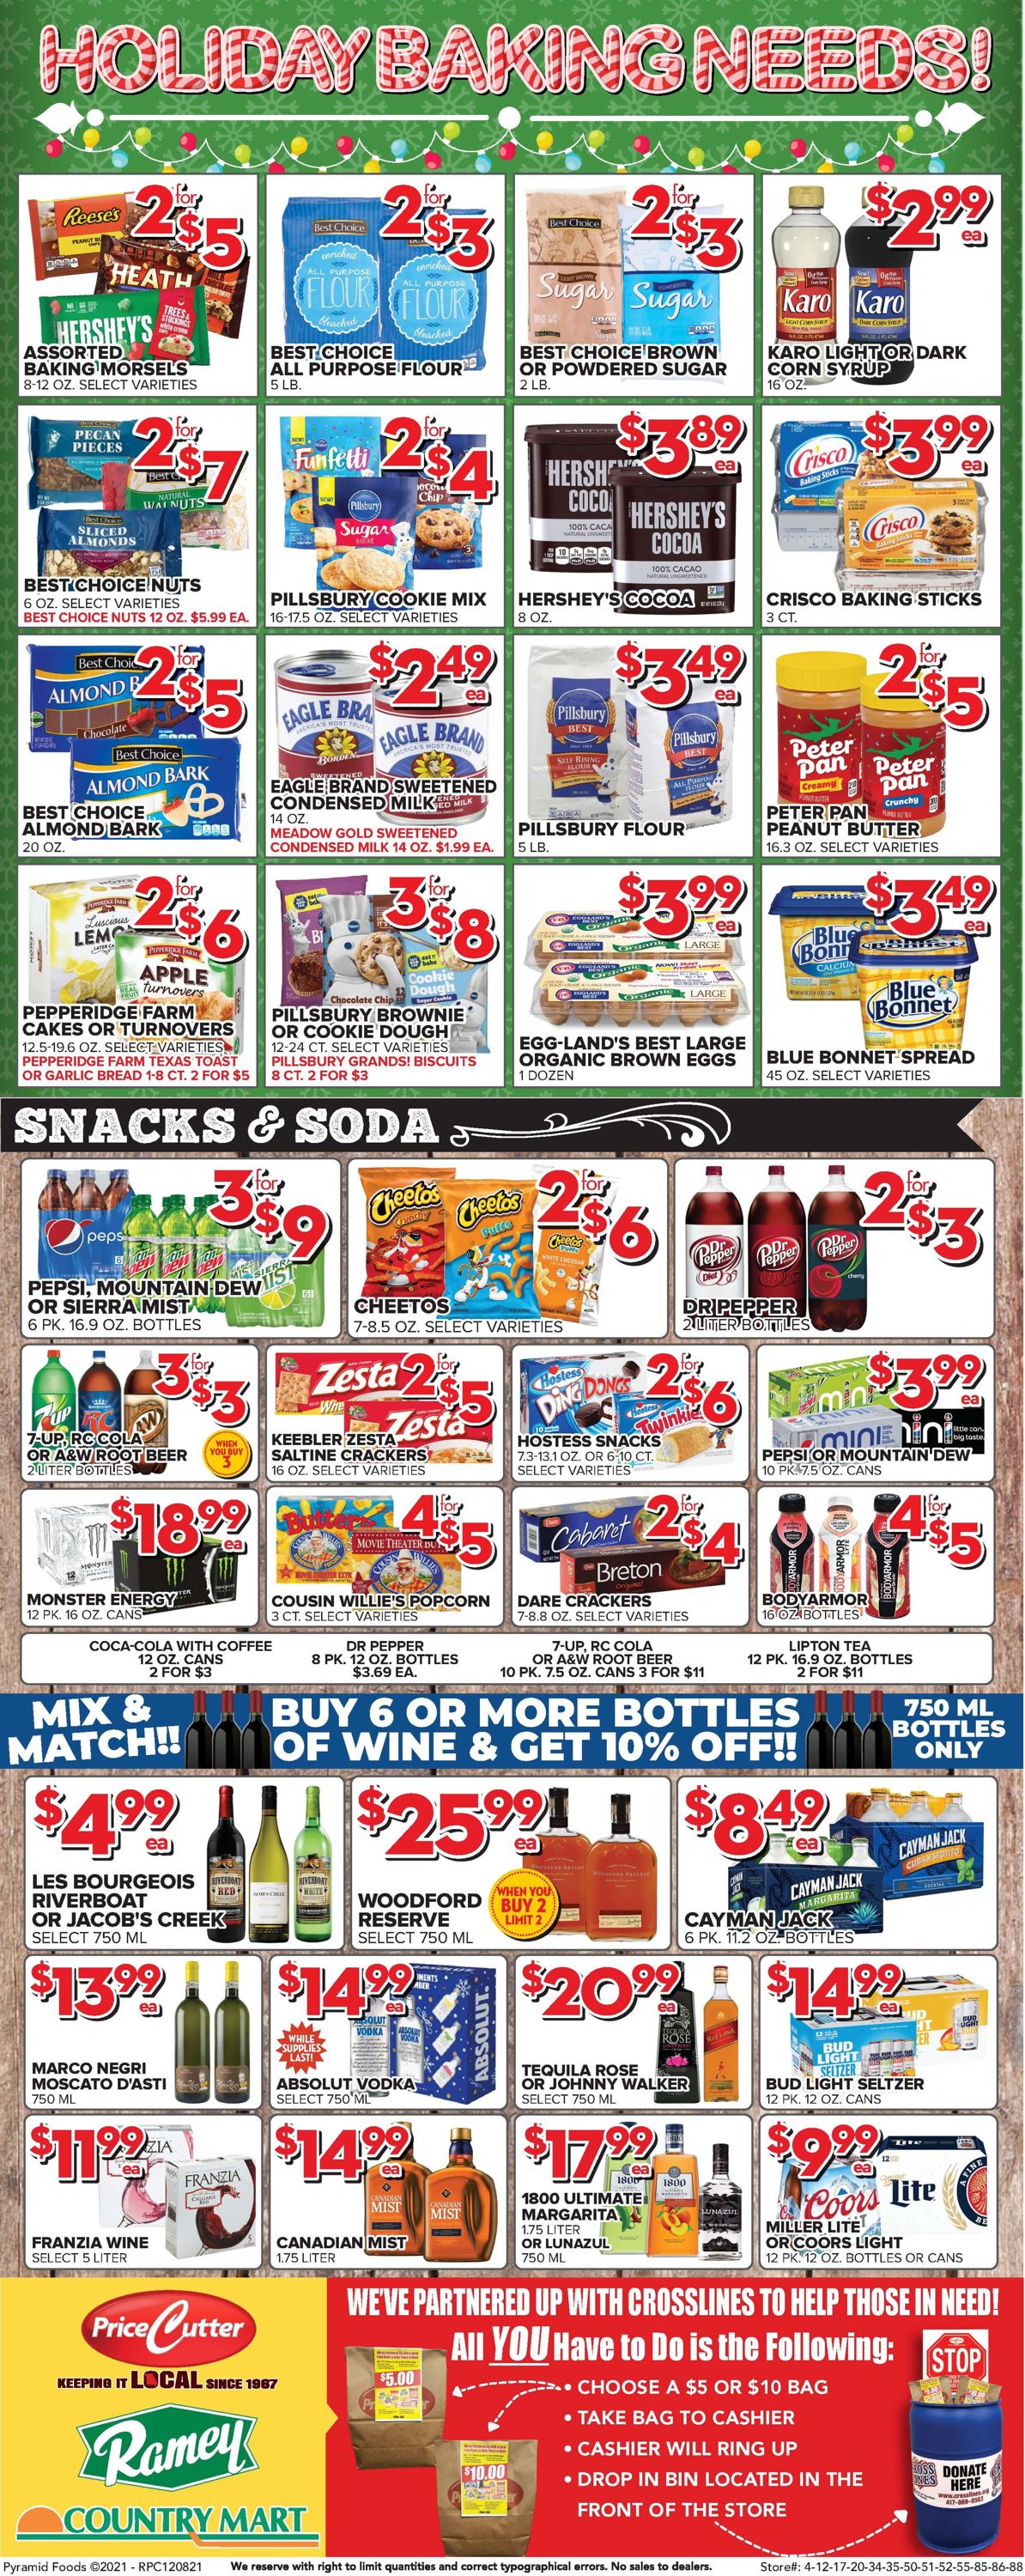 Price Cutter - HOLIDAY 2021 Weekly Ad Circular - valid 12/08-12/14/2021 (Page 4)